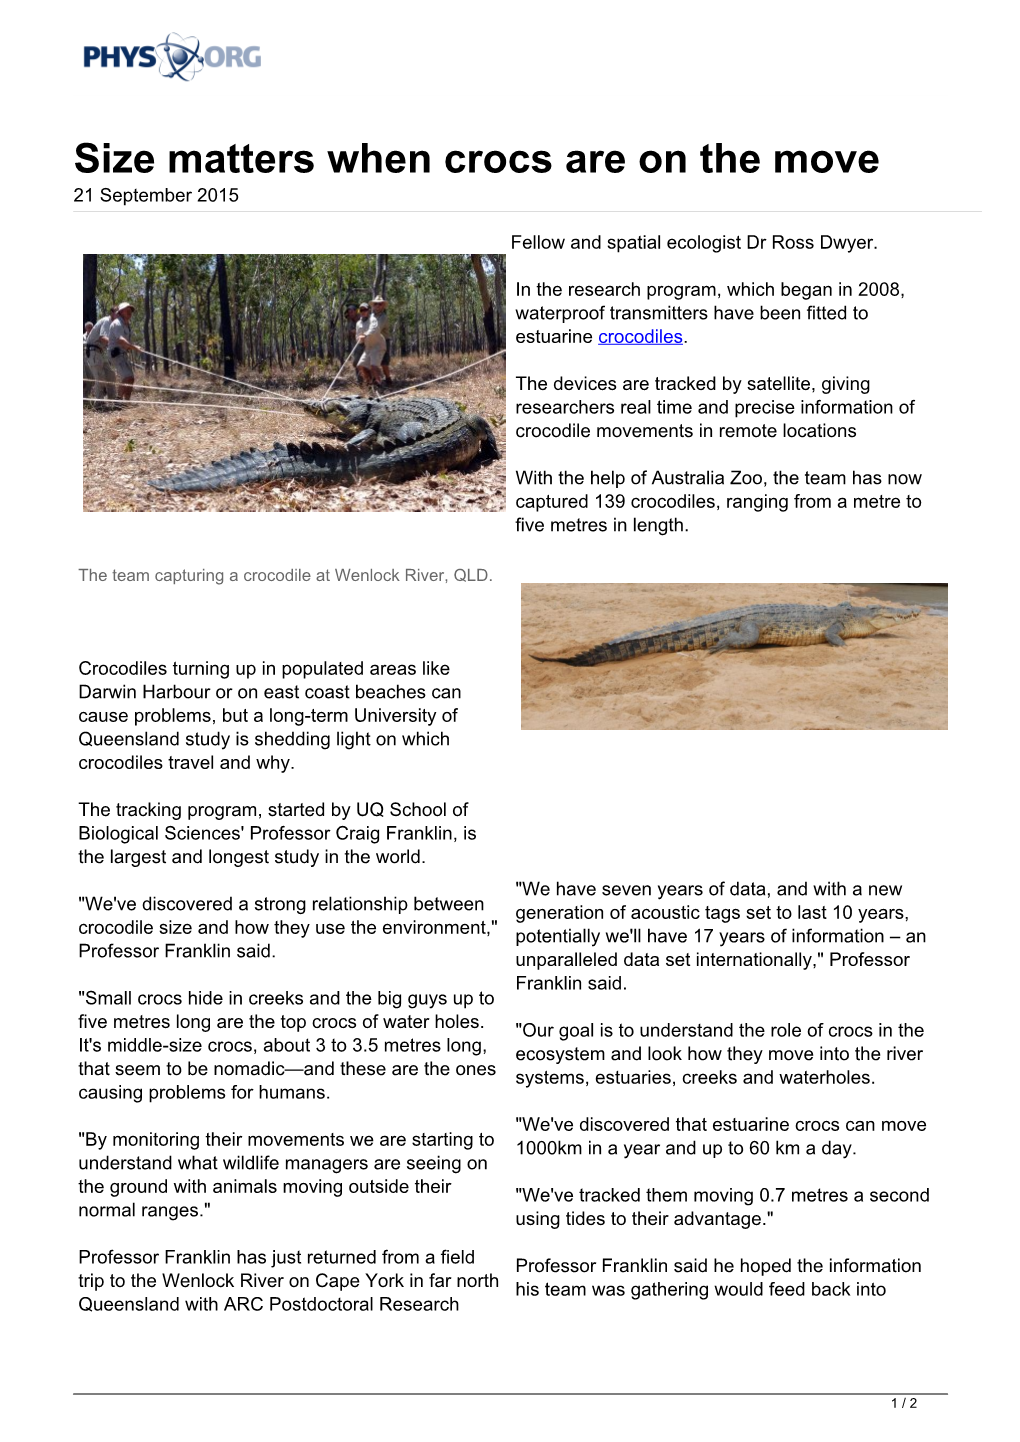 Size Matters When Crocs Are on the Move 21 September 2015